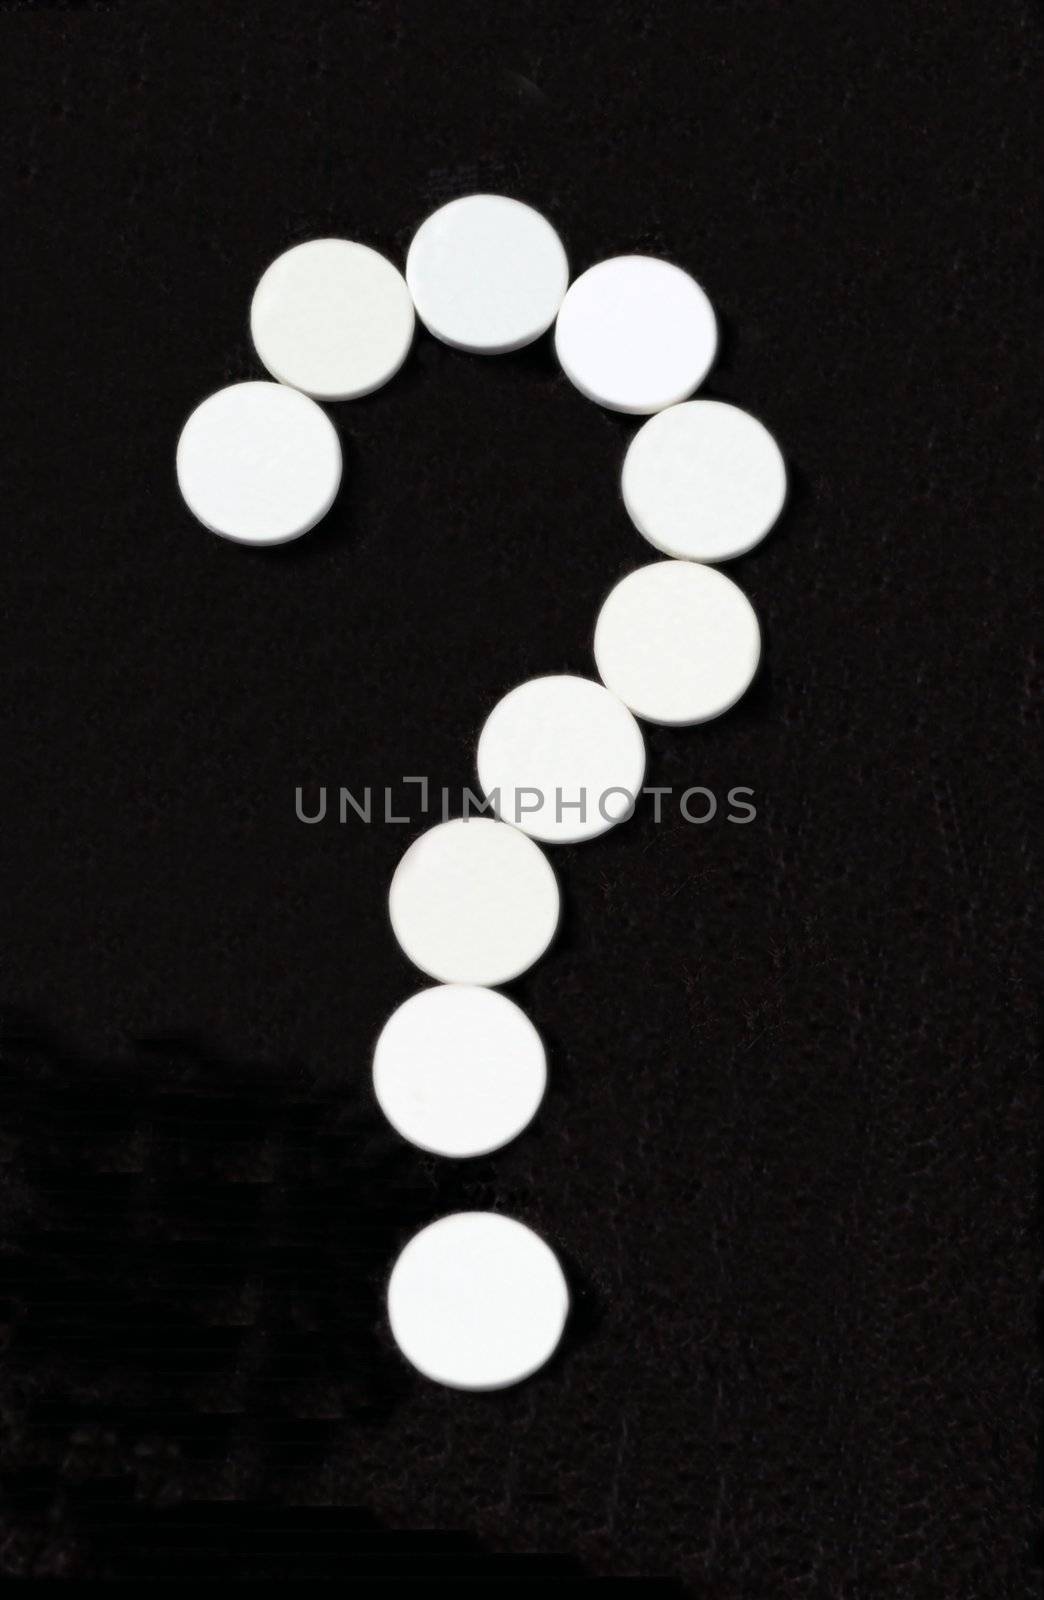 White pill question mark on black